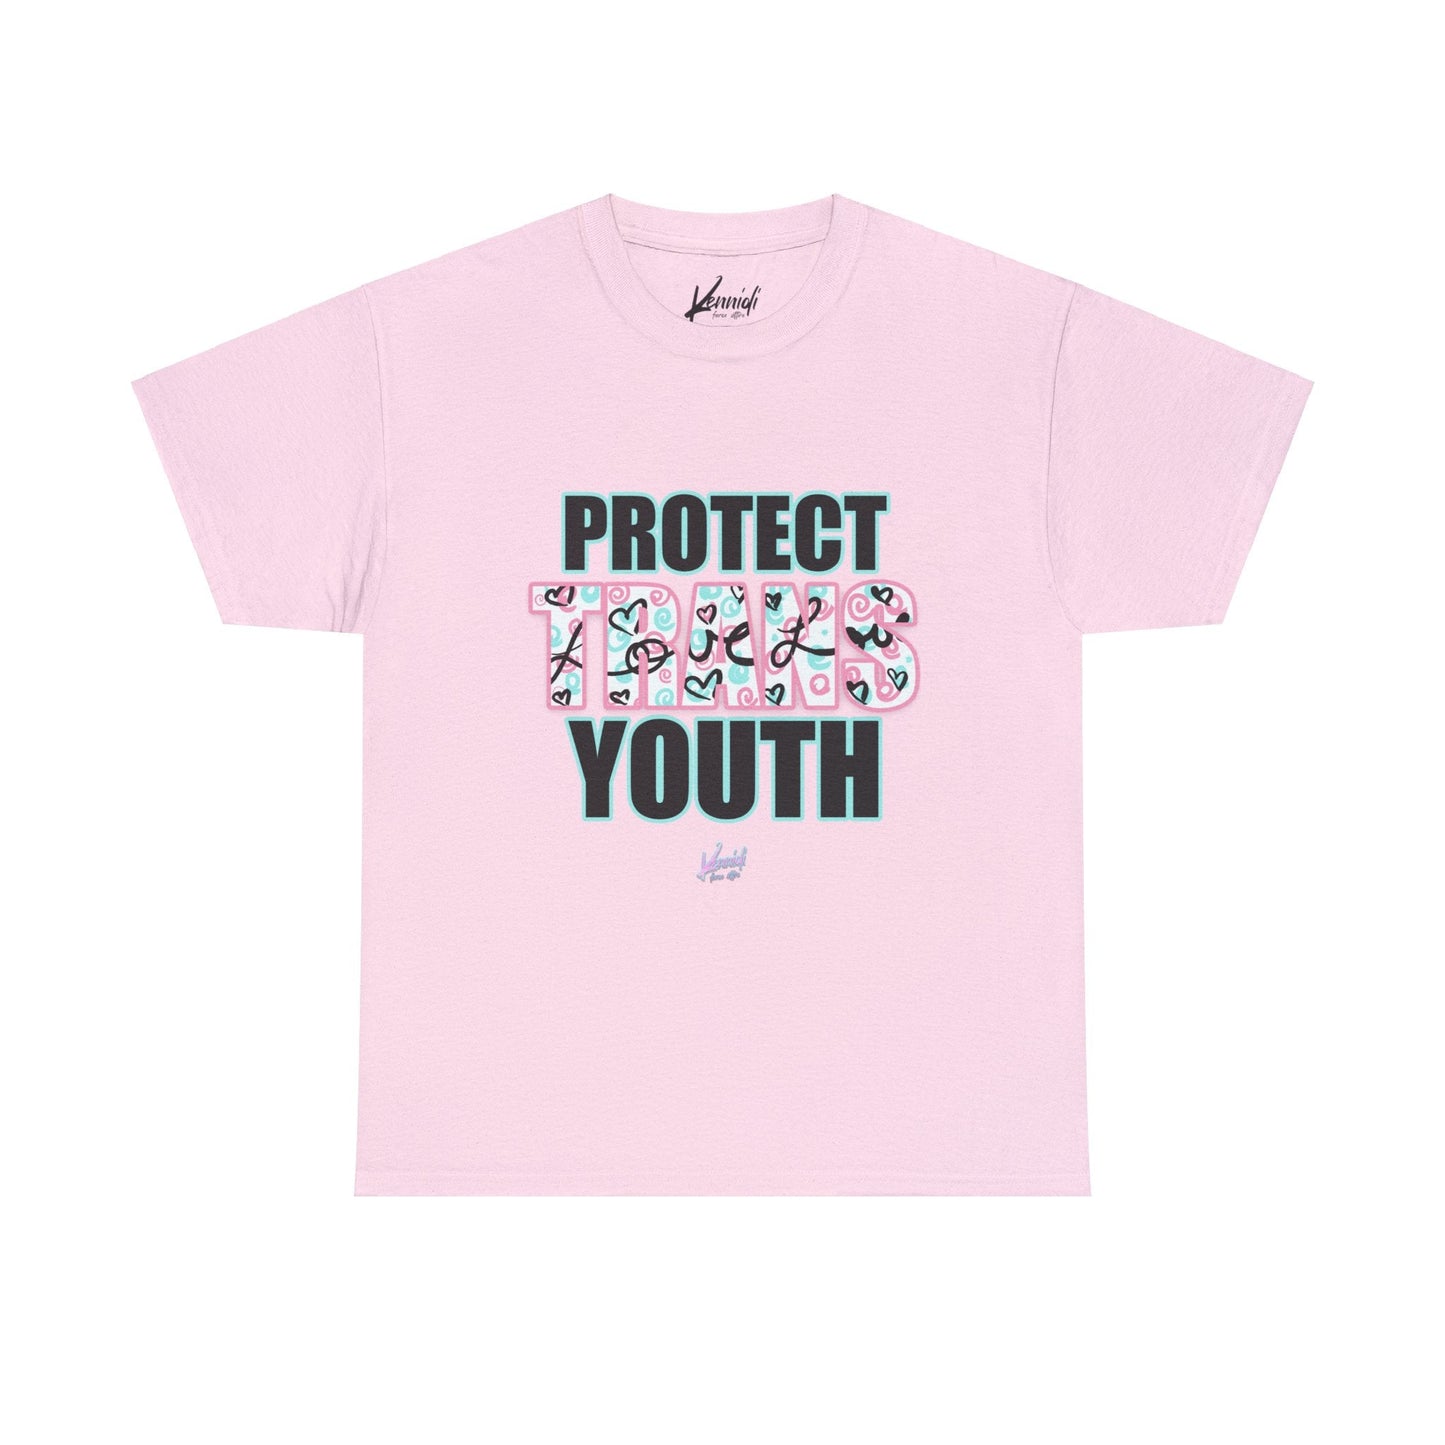 Protect Trans Youth Love 3.0 Unisex Heavy Cotton Tee - T - Shirt